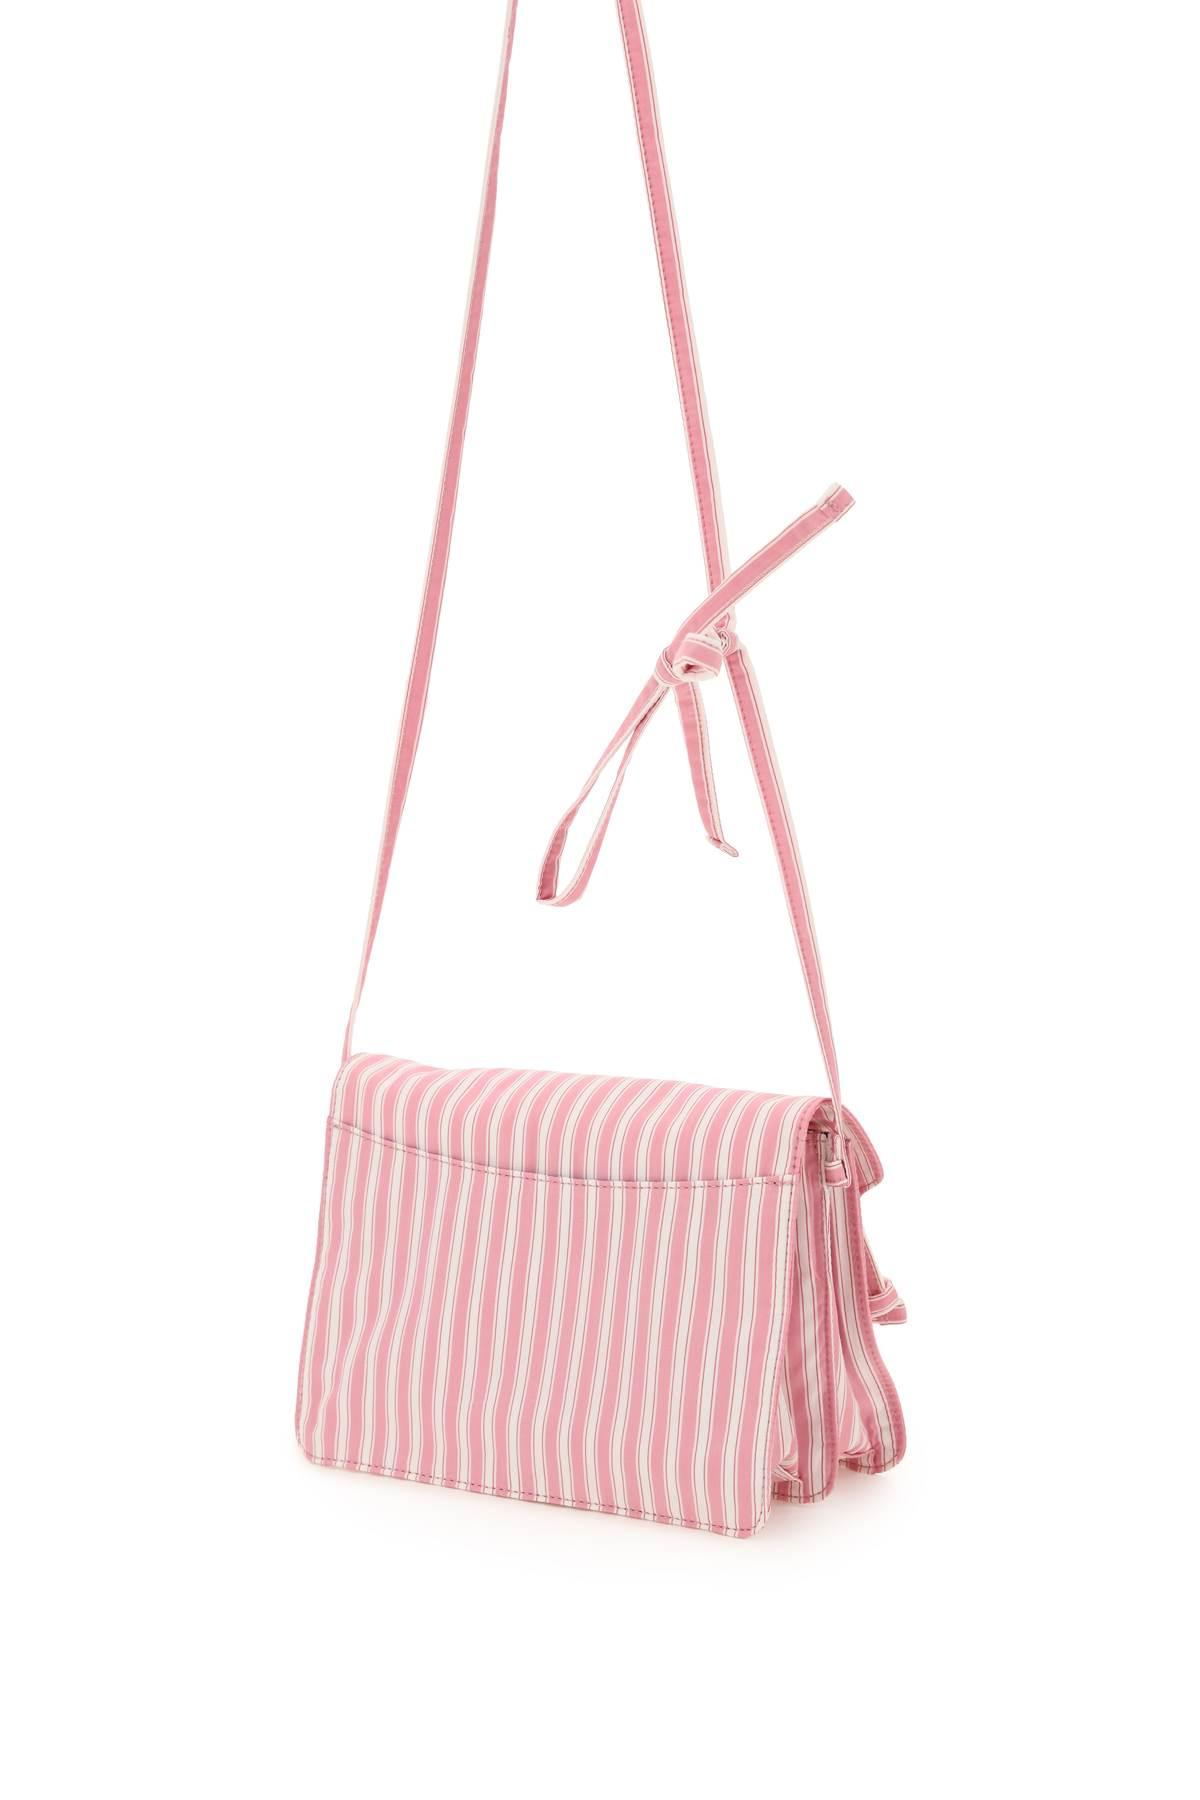 Marni Striped Canvas Medium Trunk Bag in Pink,White (Pink) | Lyst